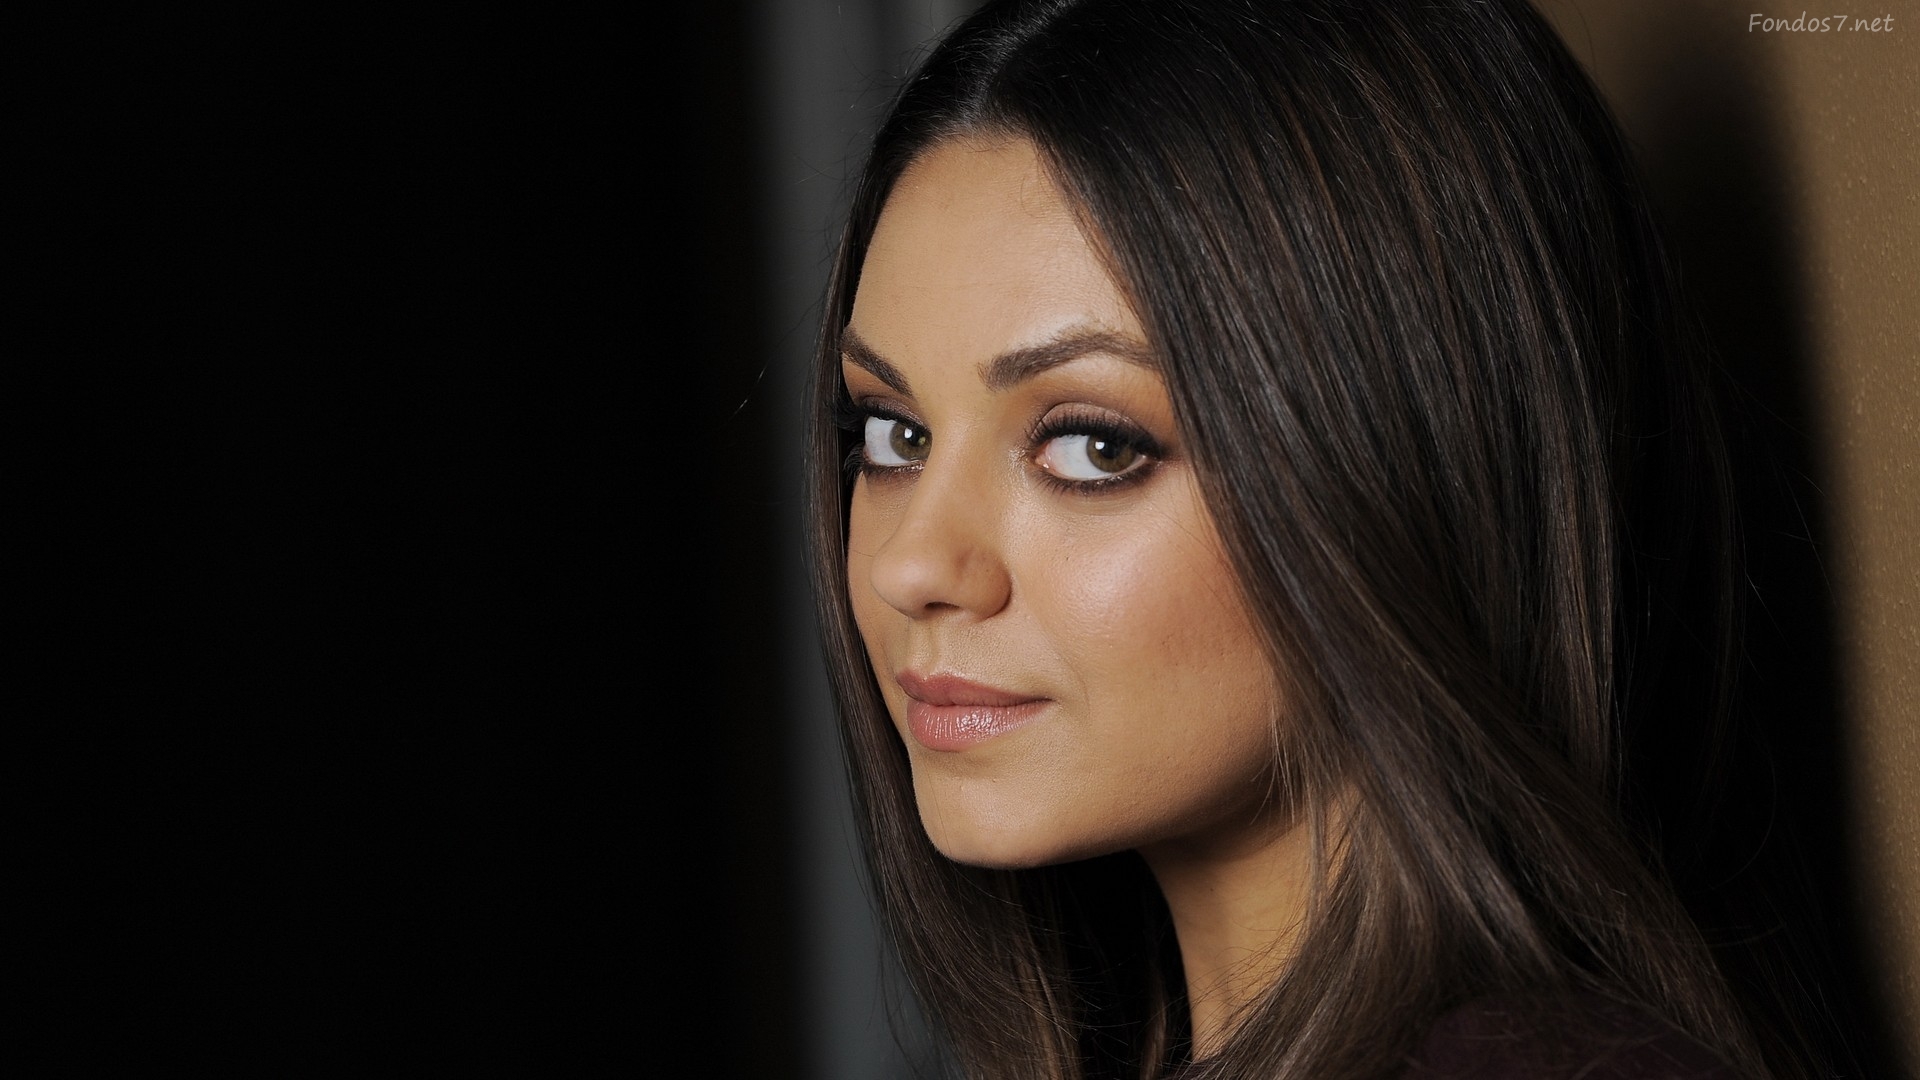 Mila Kunis | Mila Kunis Hot Pictures | Mila Kunis Hot Images | Wallpaper 2of 15